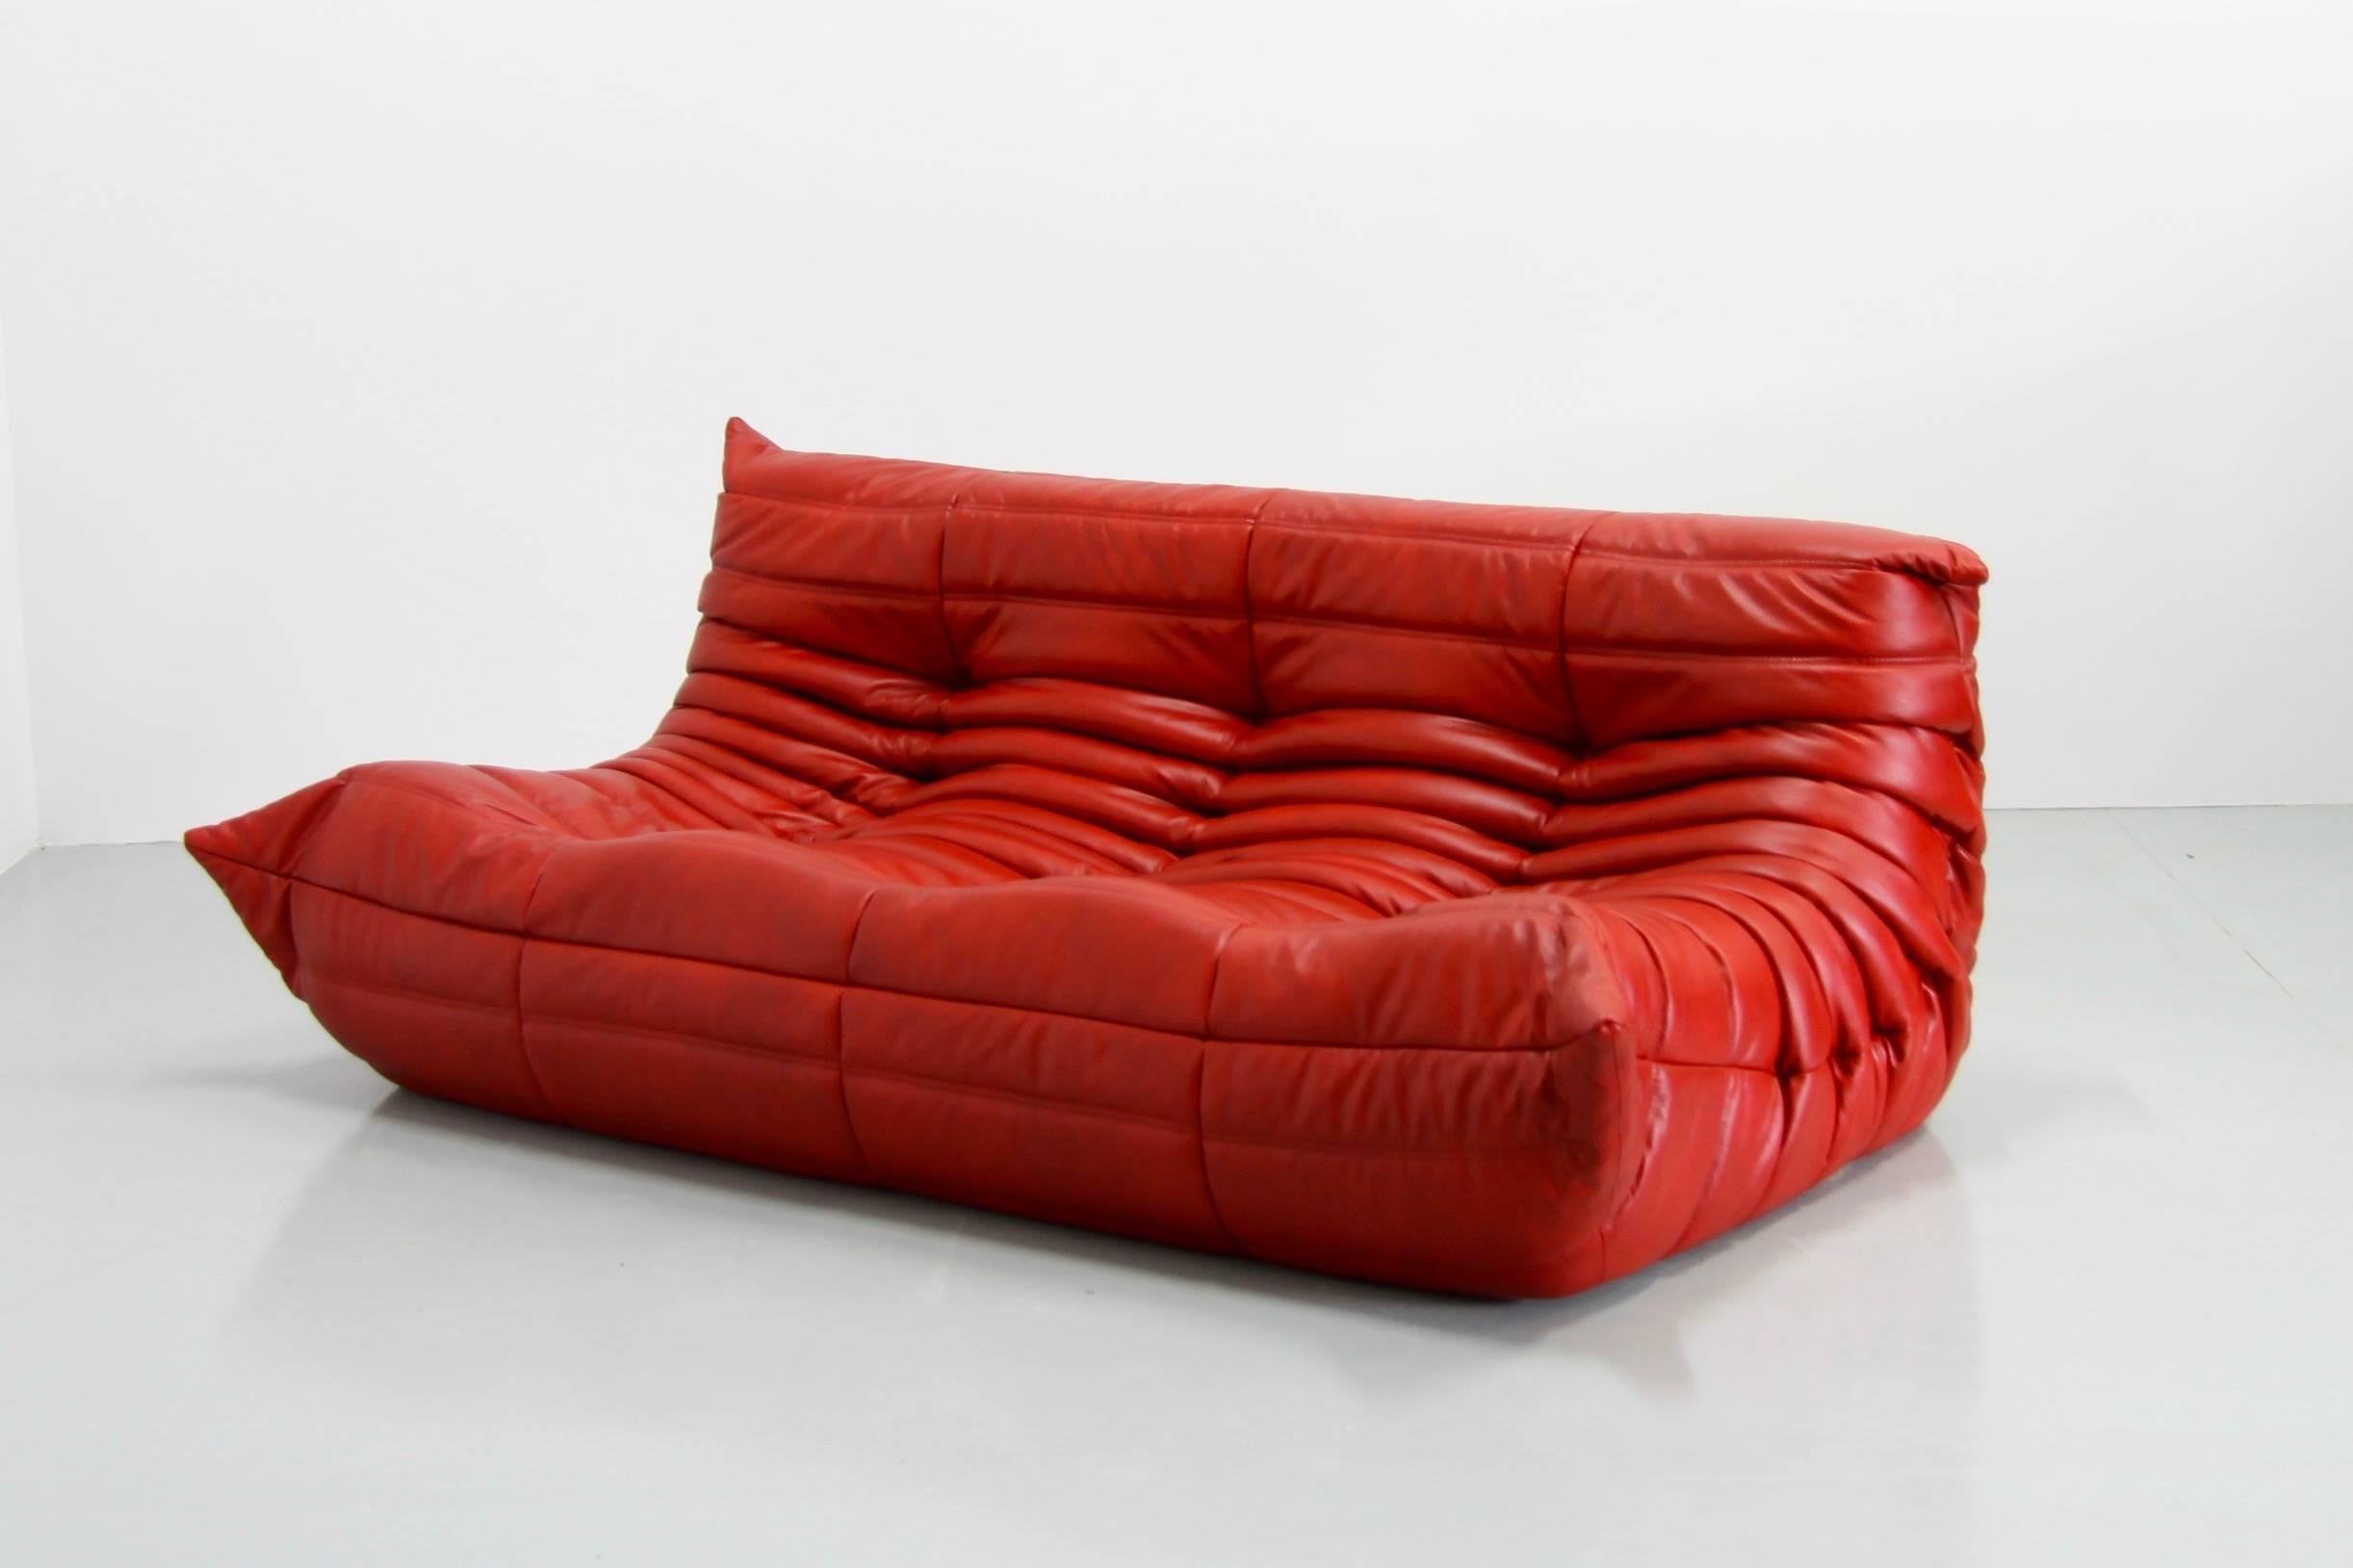 This Togo living sofa was designed by Michel Ducaroy in 1974 and was manufactured by Ligne Roset in France. It has been reupholstered in genuine red leather and is a 3-seater couch (70 x 176 x 102 cm). It has the original Ligne Roset logo.